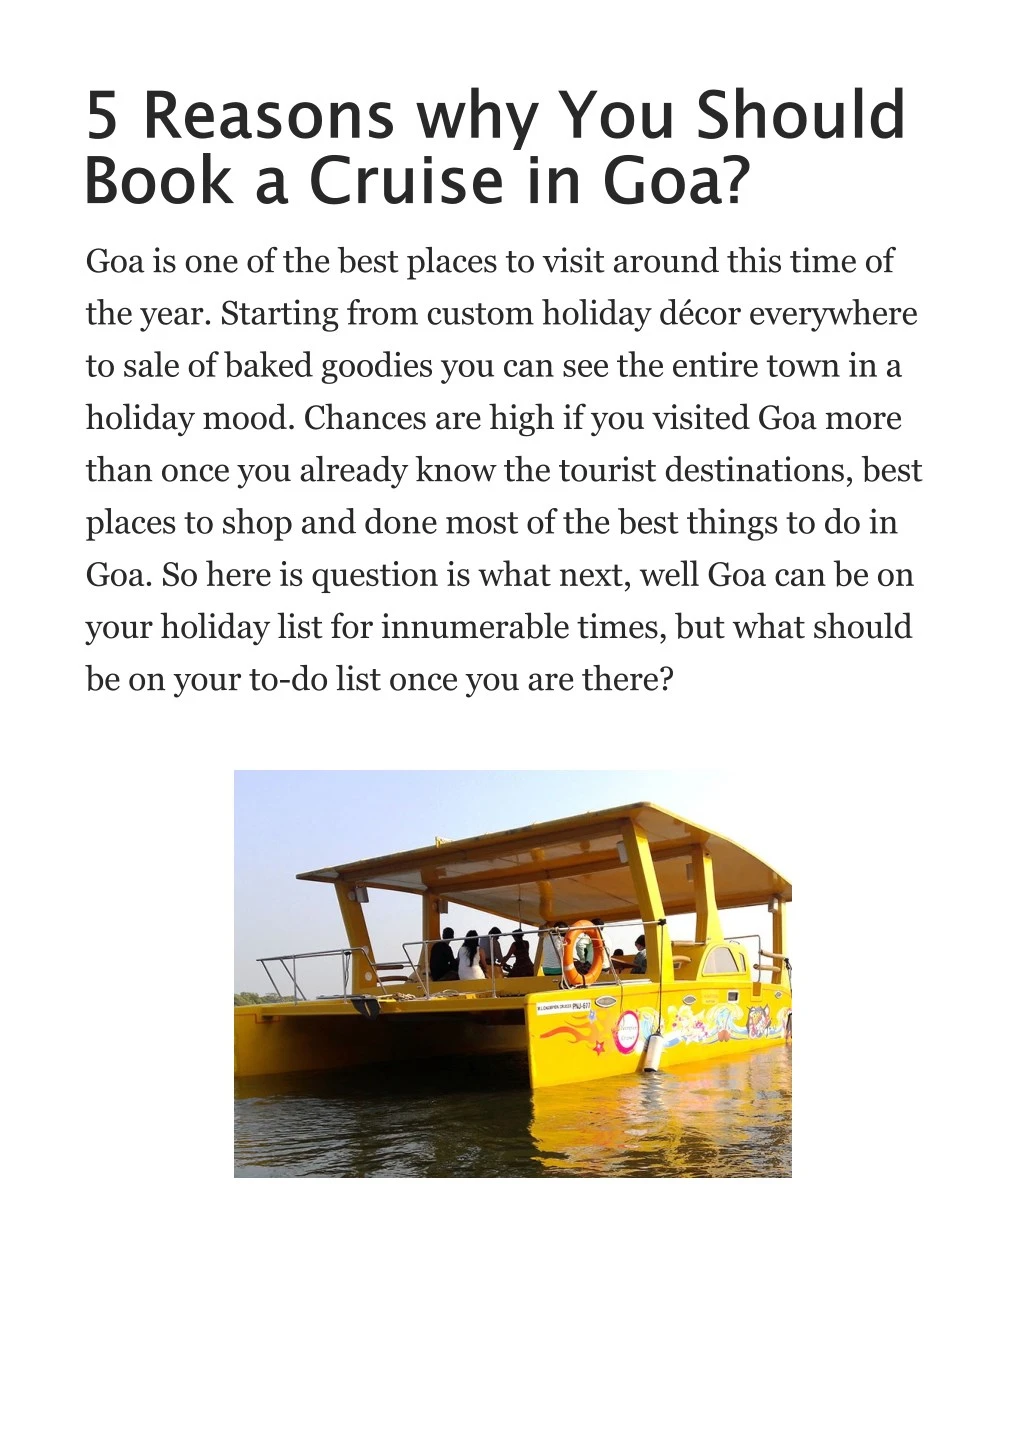 5 reasons why you should book a cruise in goa